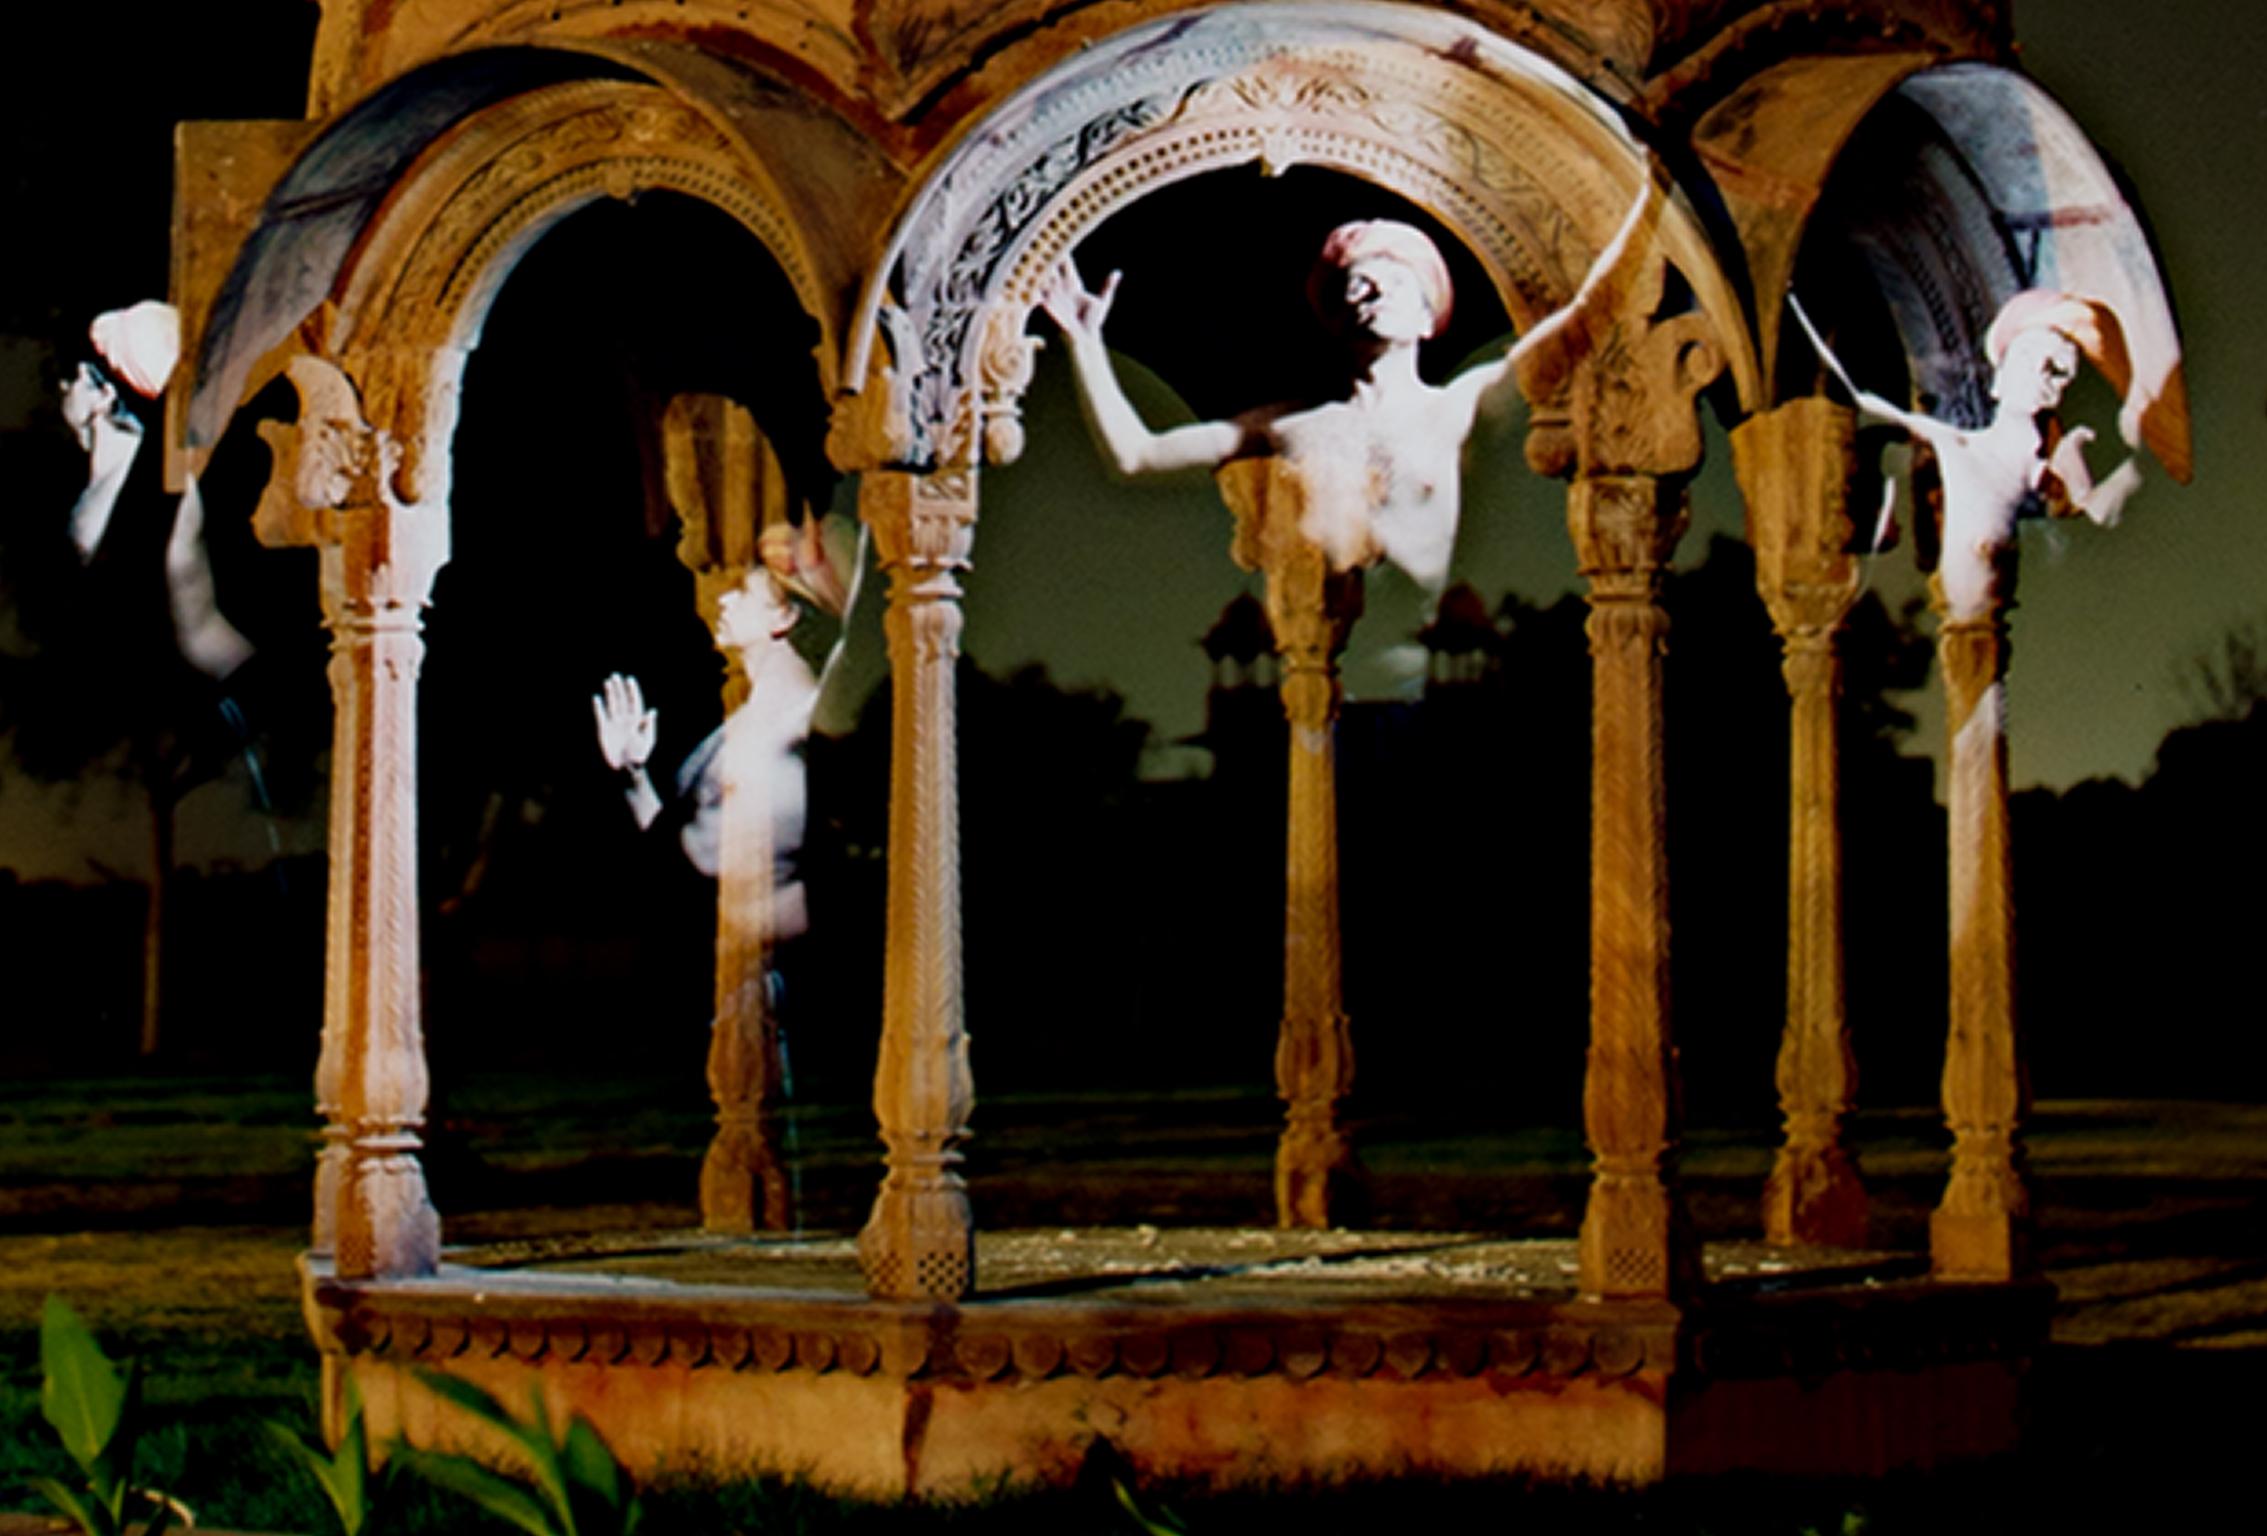 India Spirtual Dark Religious Supernatural Performance Photograph Outdoor Signed For Sale 2